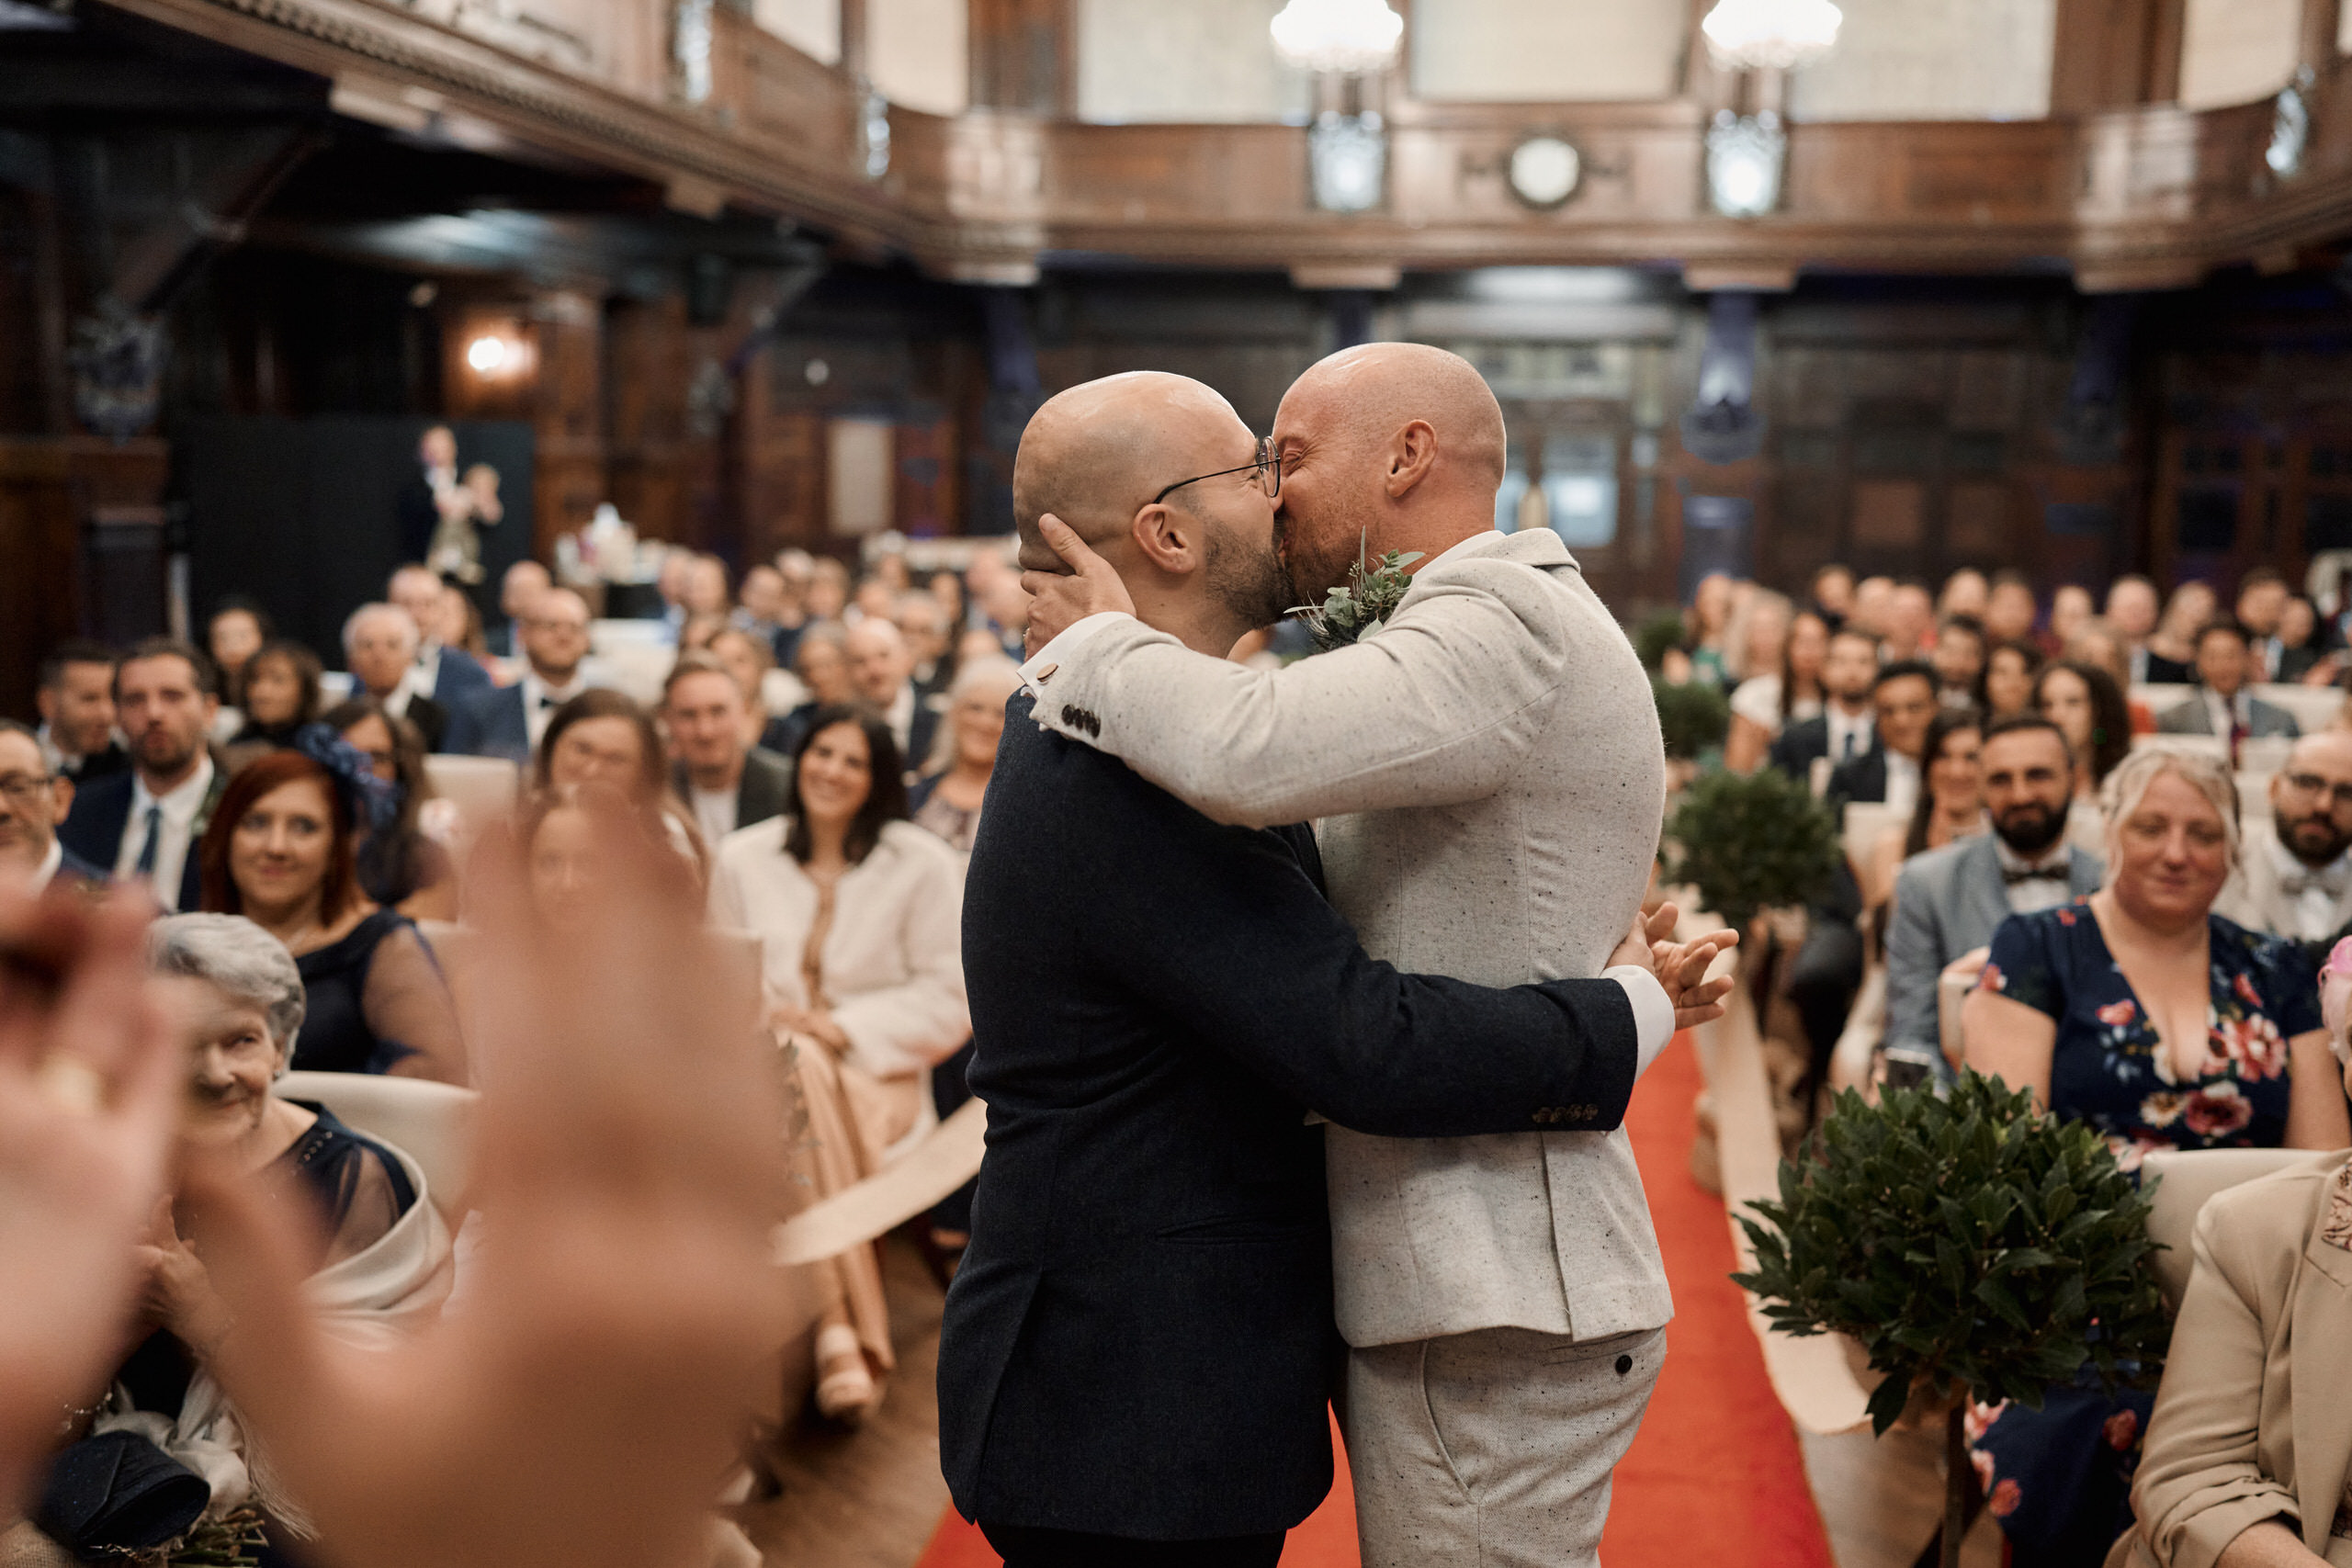 A guy kisses another guy at a wedding.